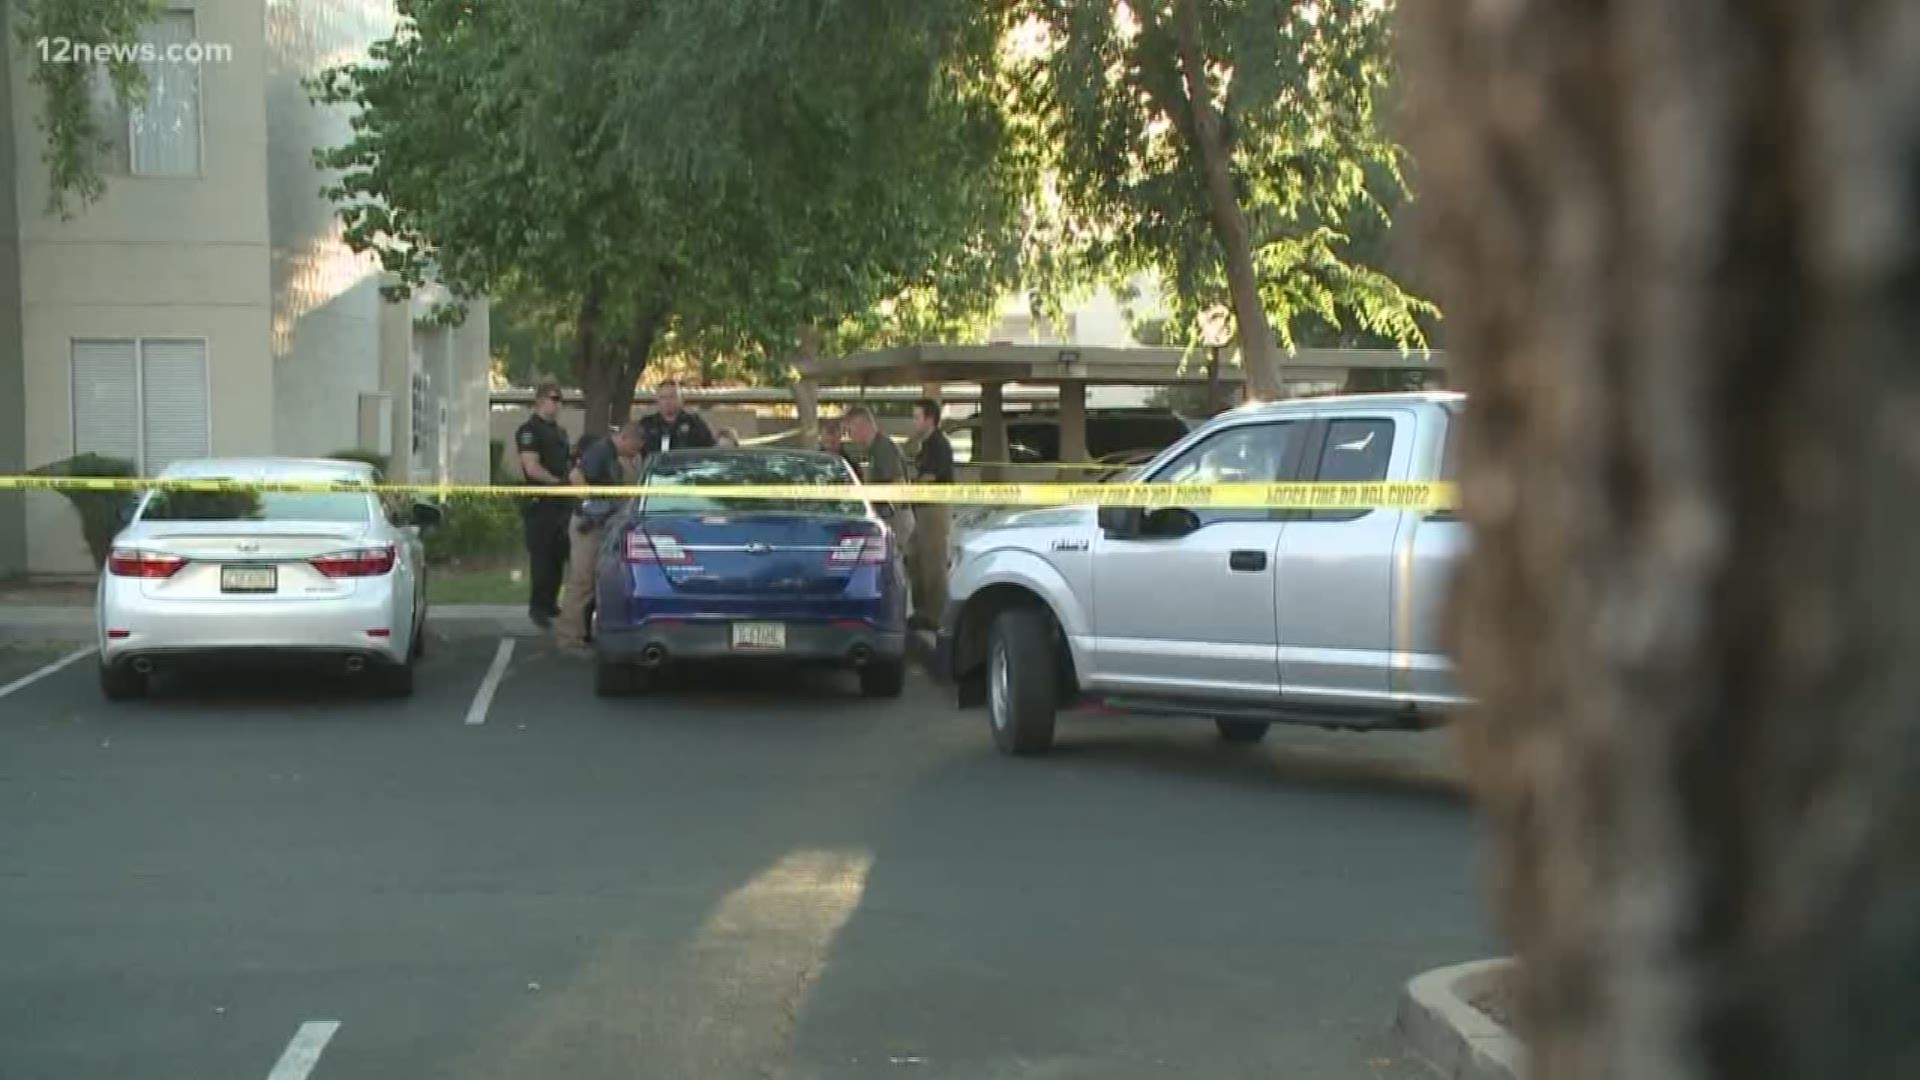 The Glendale Police Department said the 1-year-old girl died Monday after she was left in a hot car.